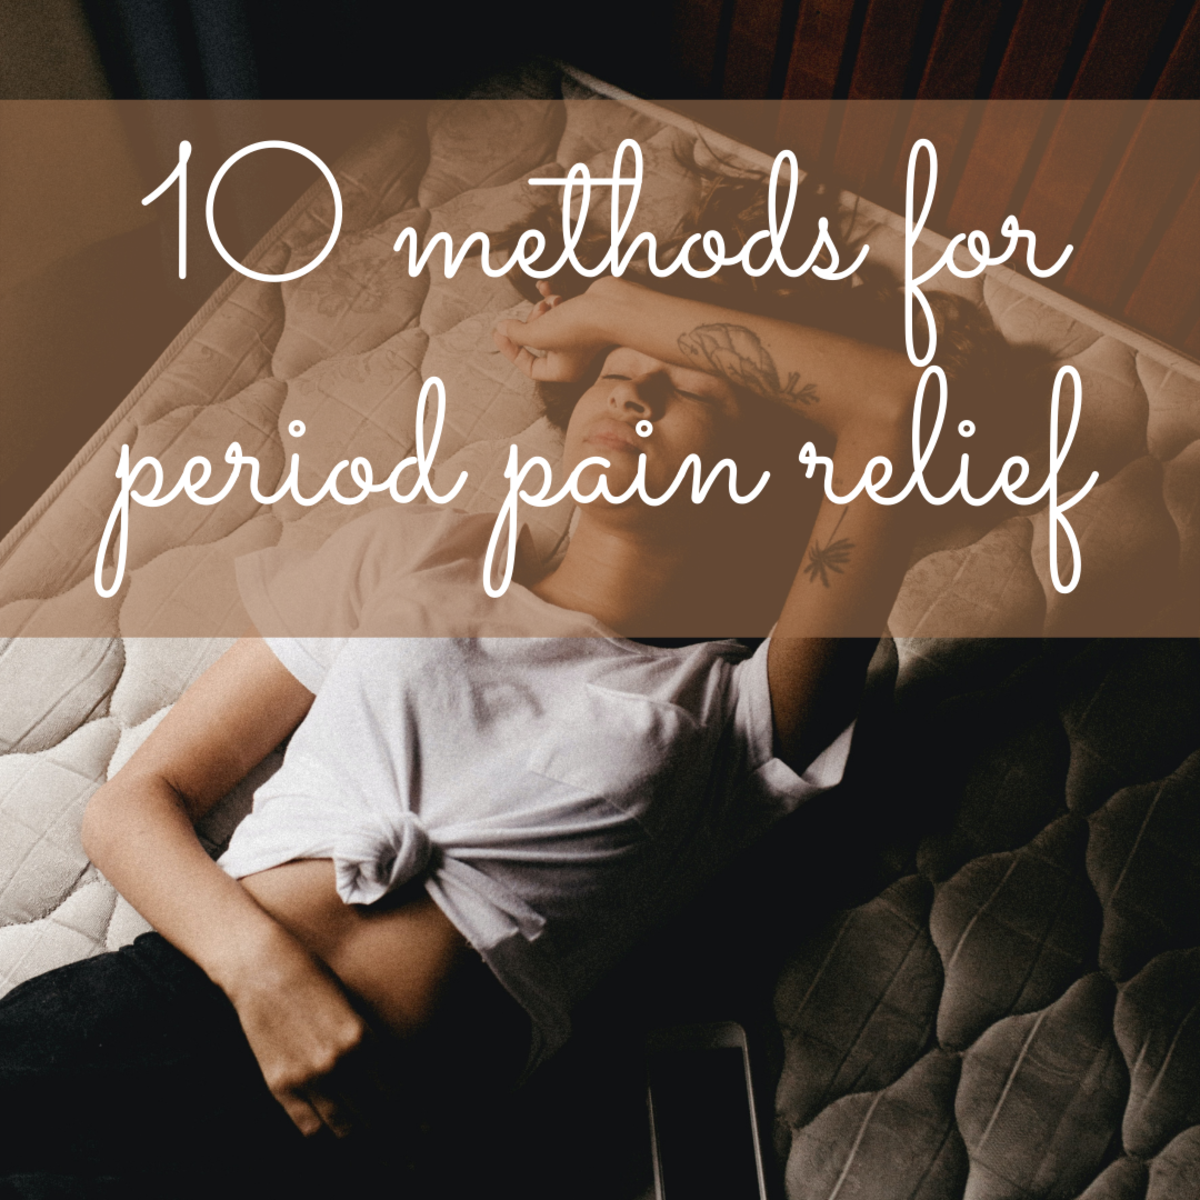 Period Pain Relief: 10 Remedies for Menstrual Cramps You Wish You'd Discovered Earlier